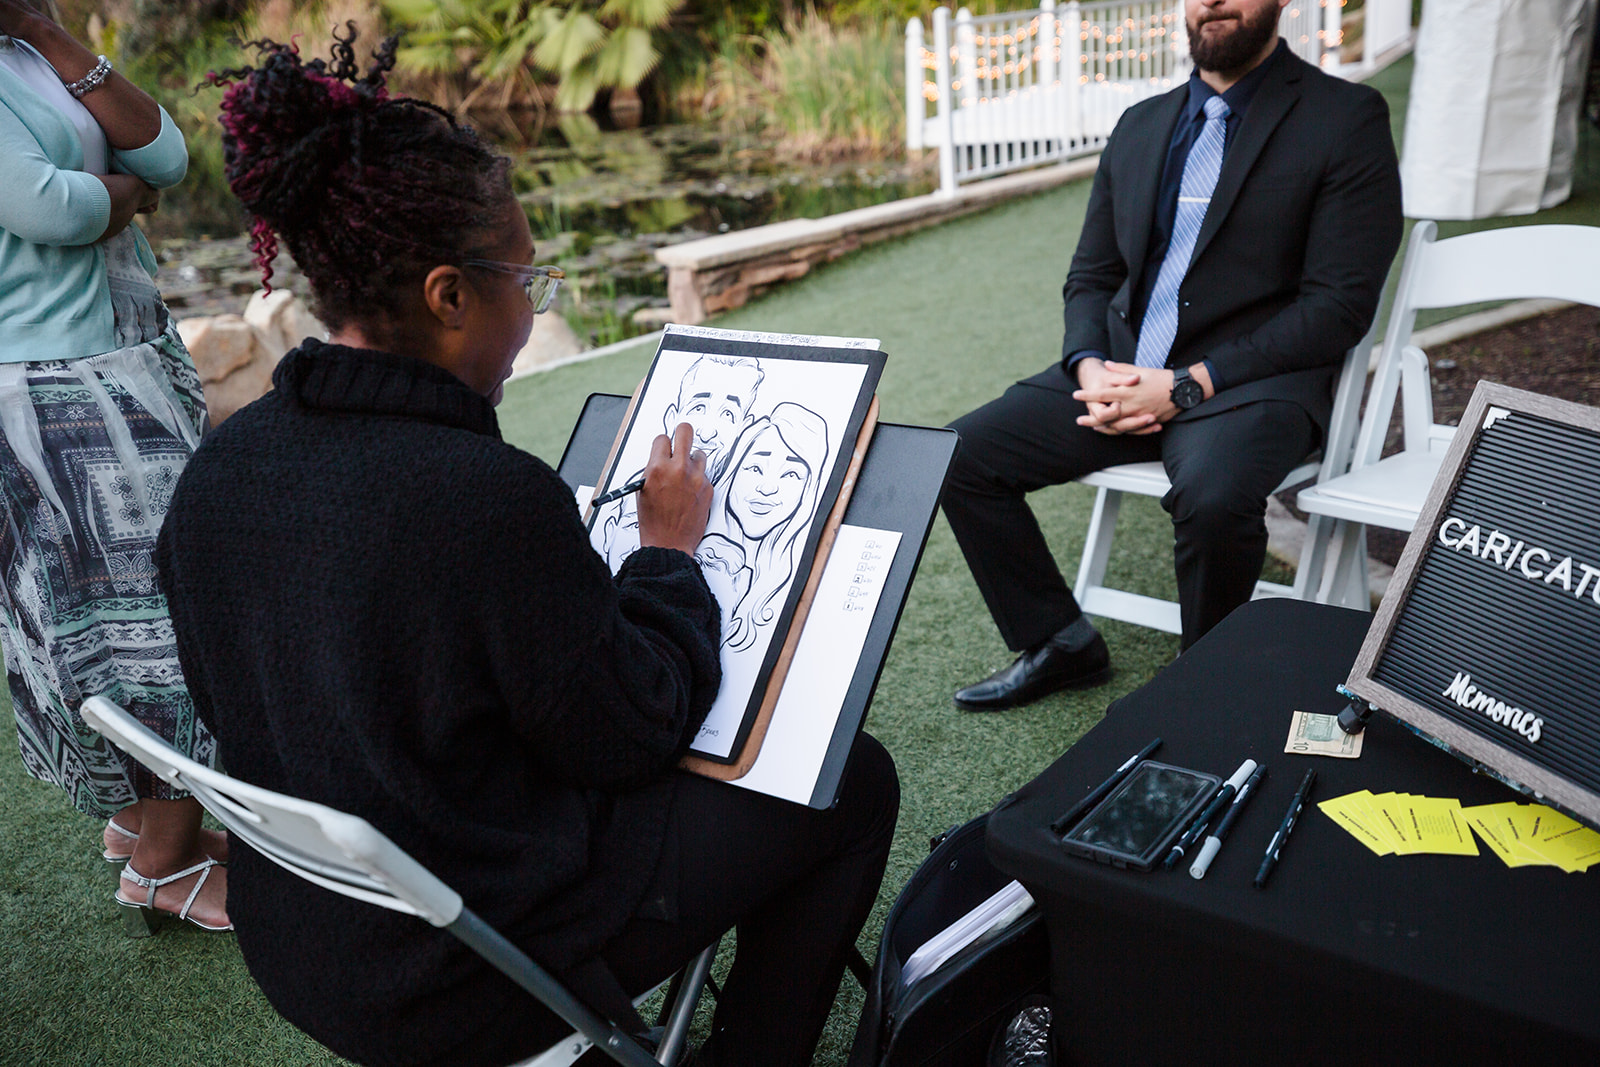 Caricature artist draws a wedding guest and their family during the reception